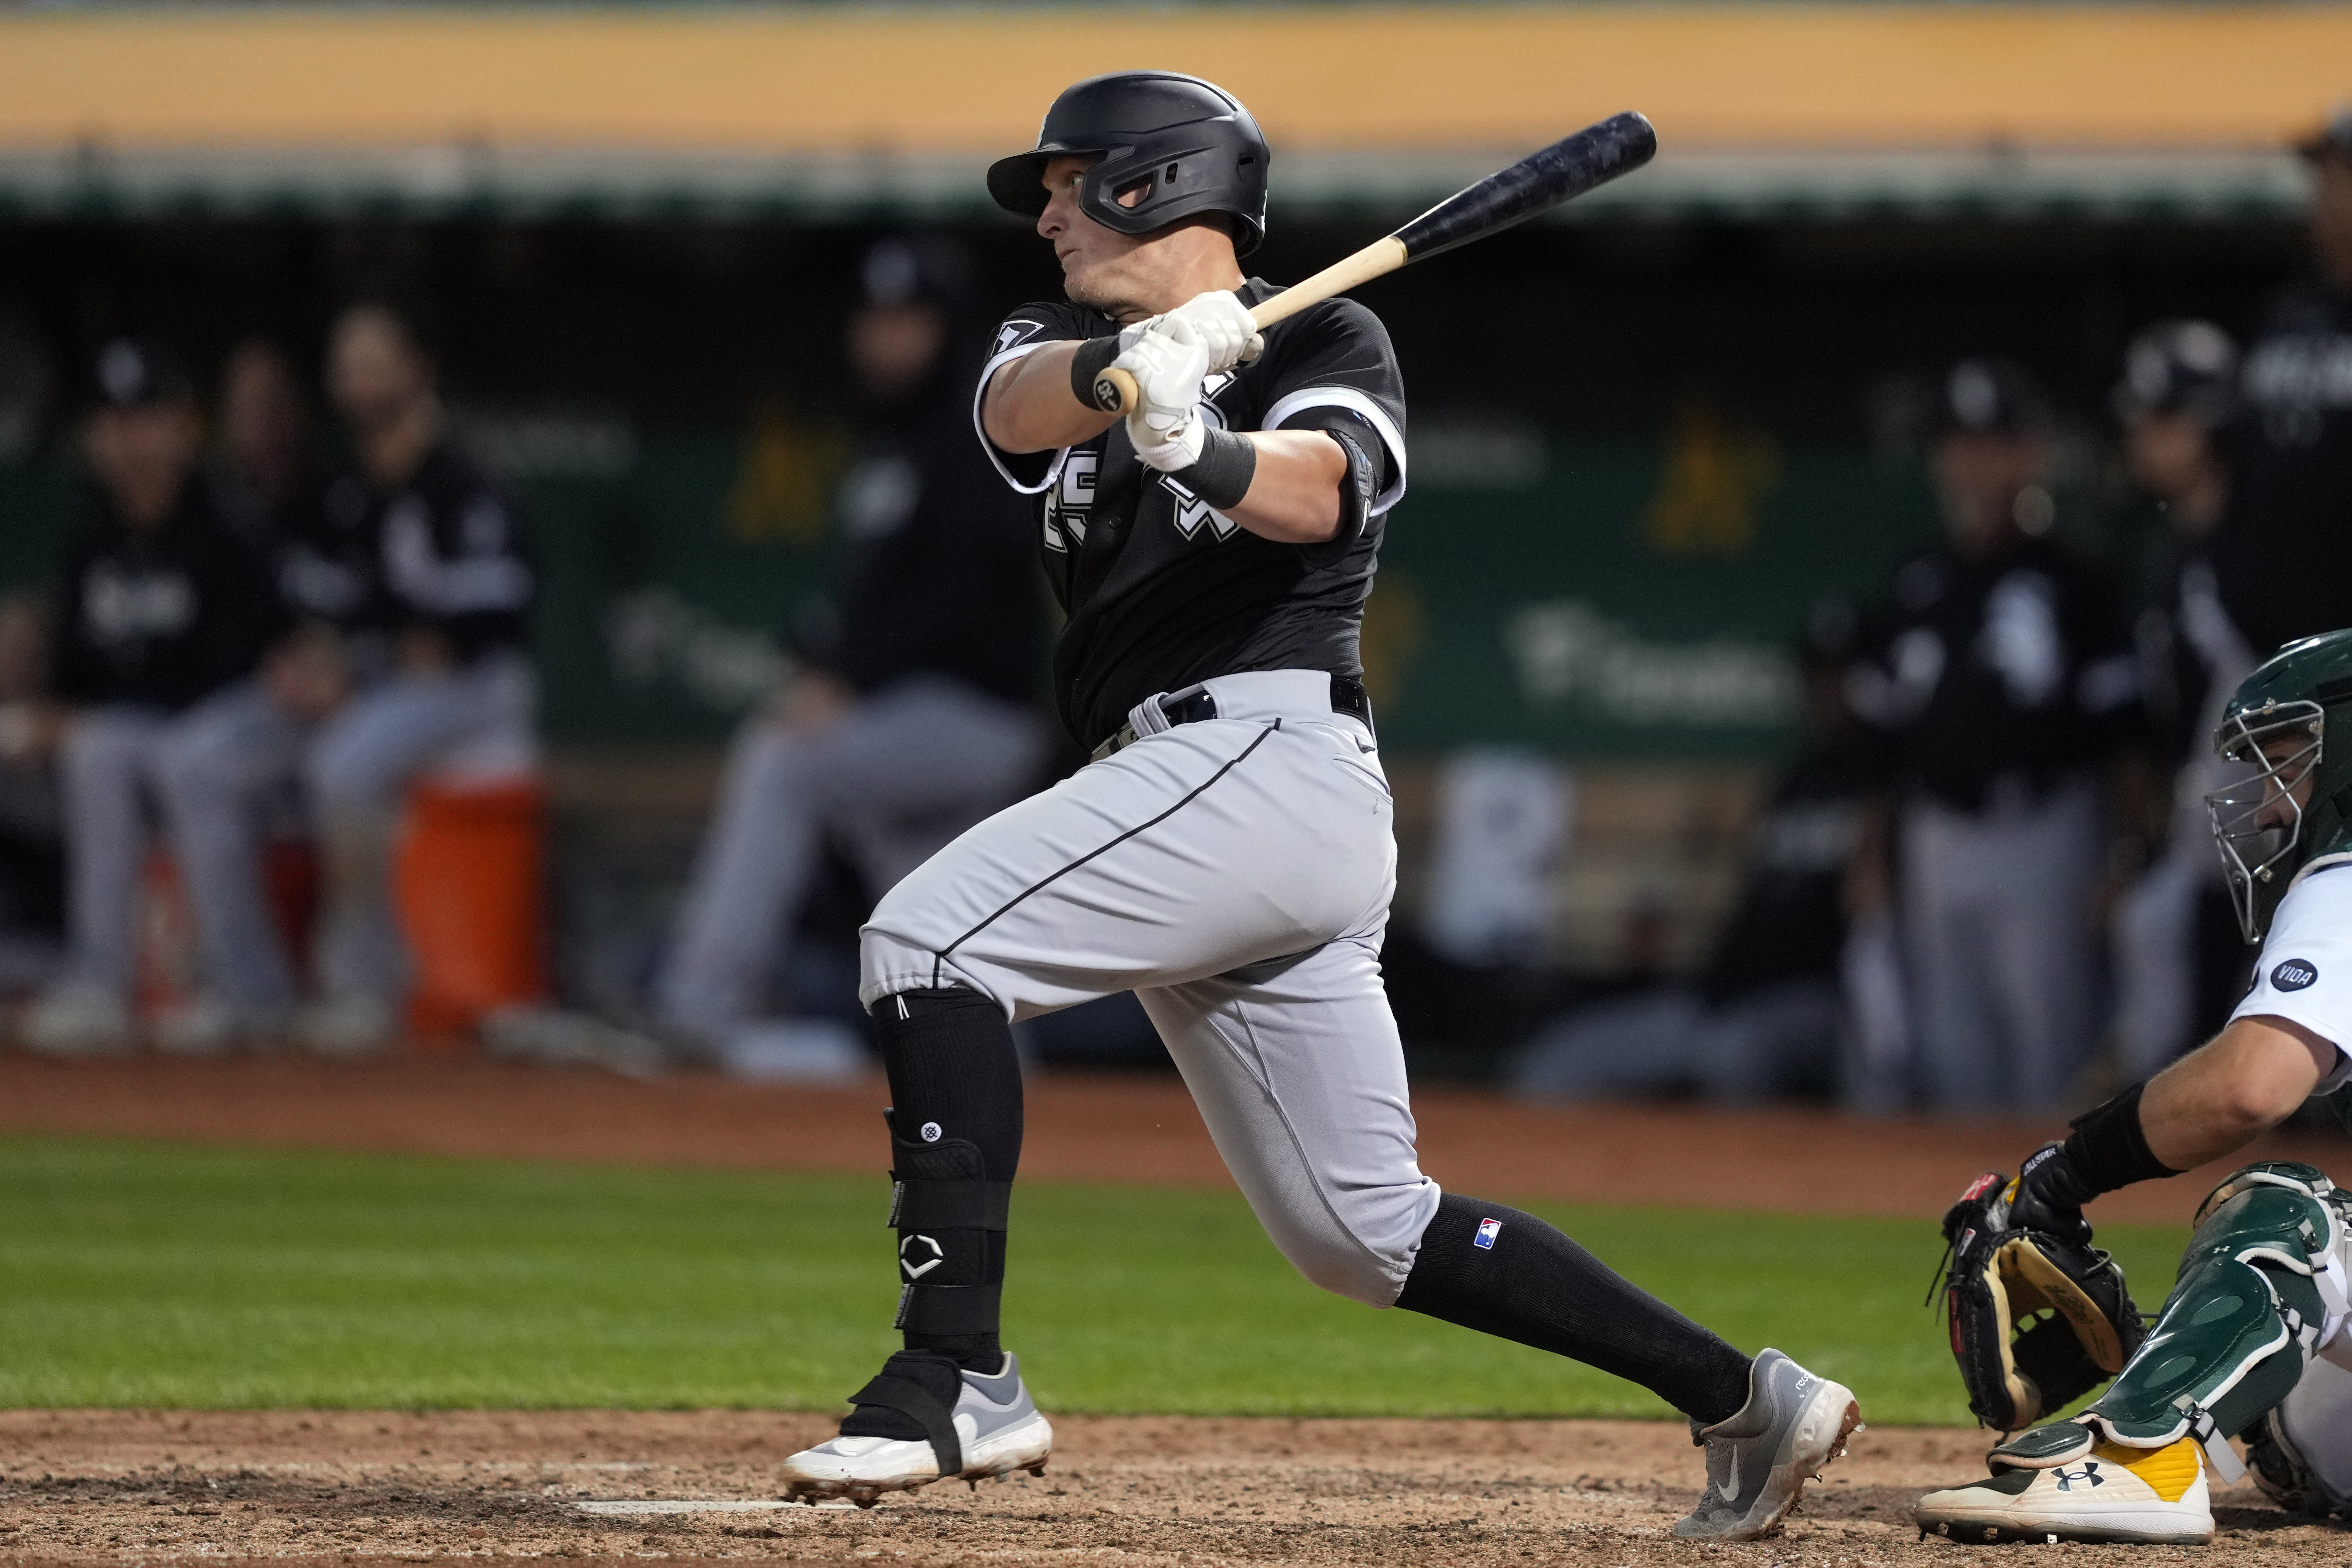 Hot stuff: Robert aims to make instant impact with Chicago White Sox